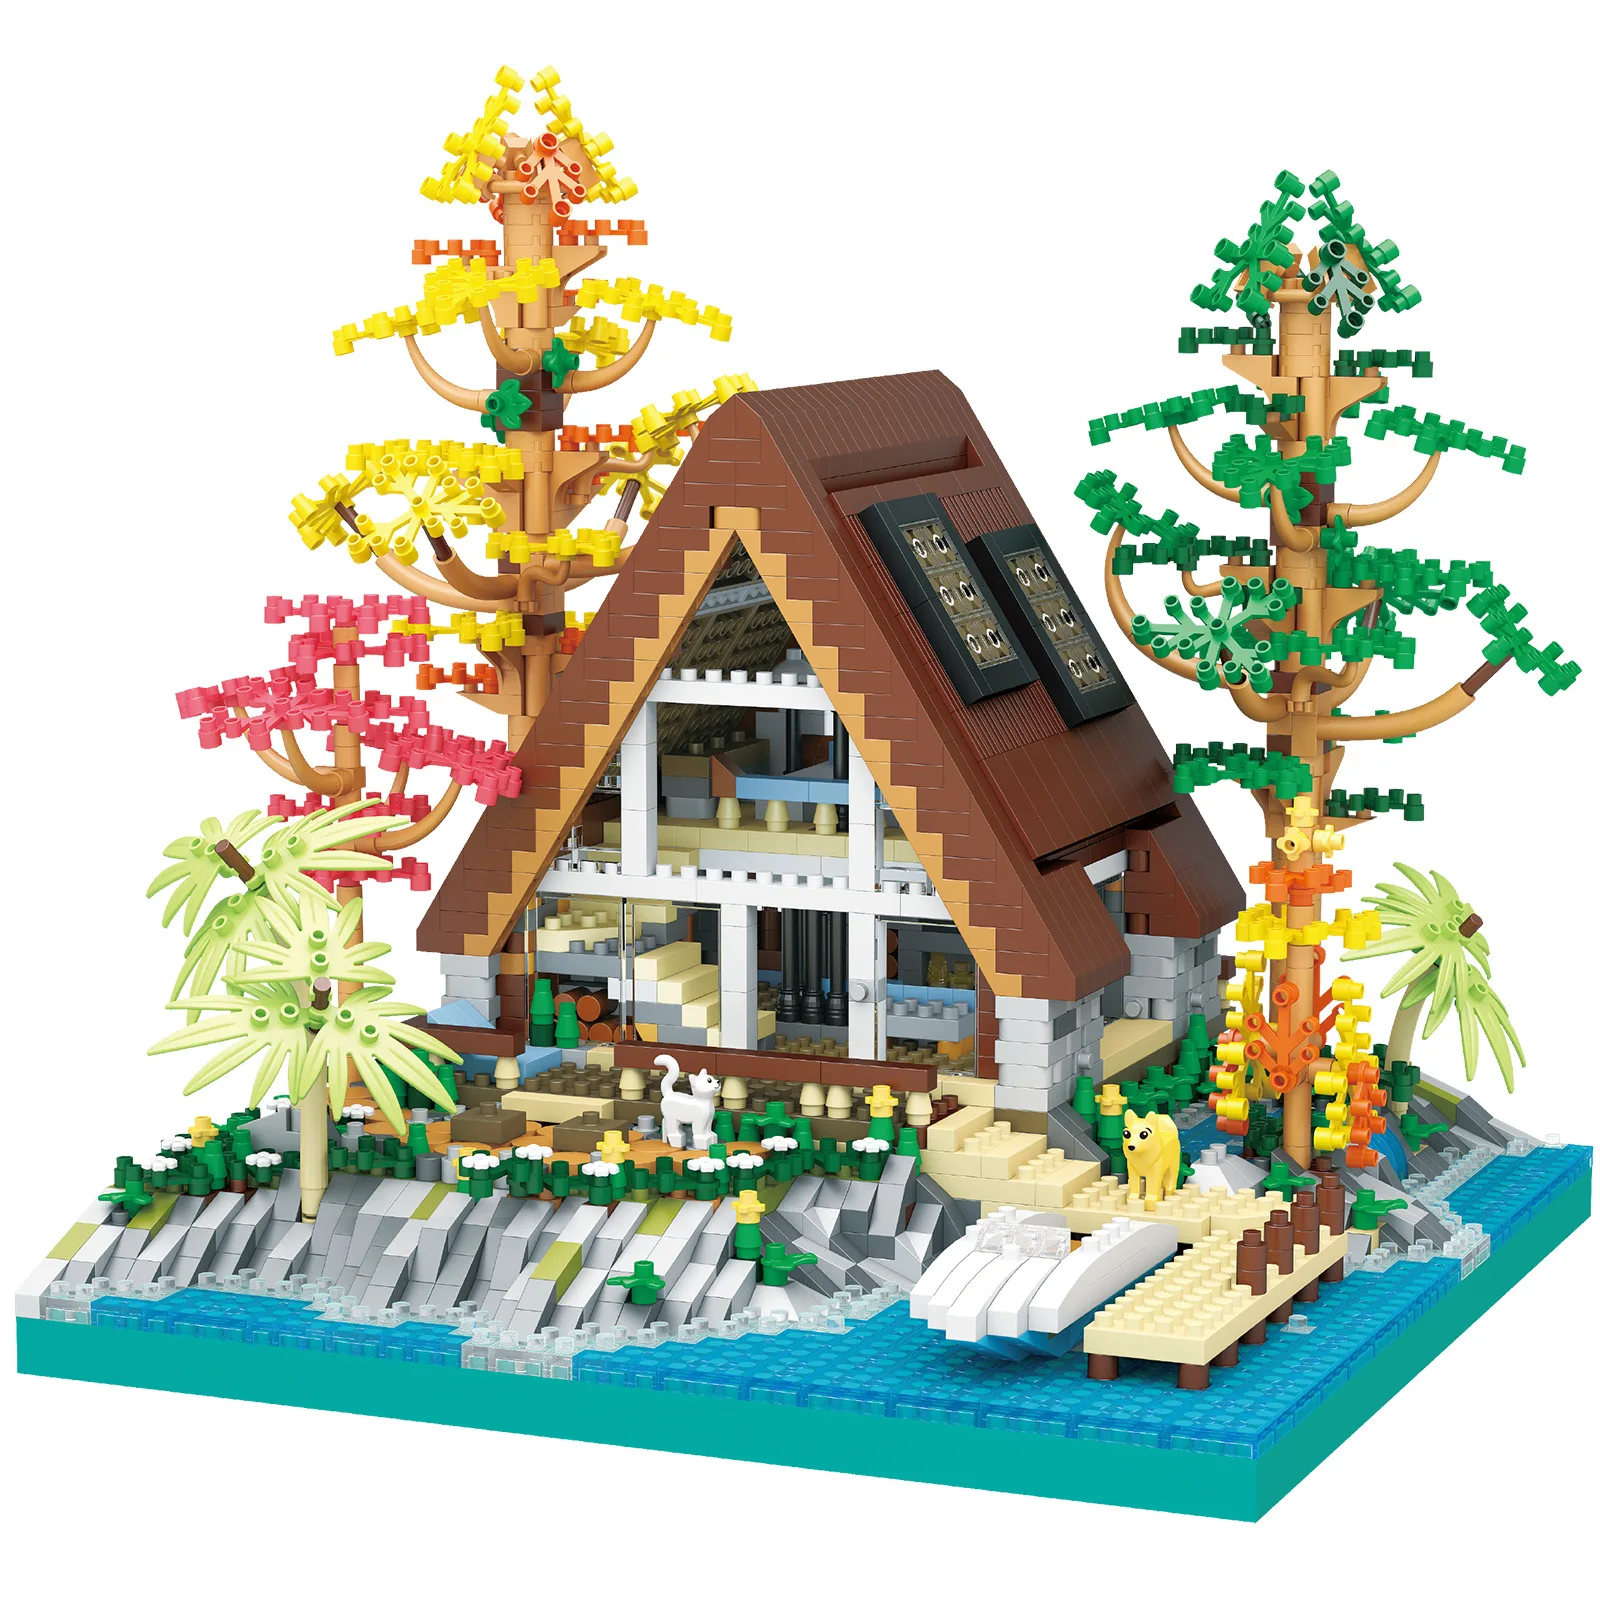 Creative City Street View House Micro Diamond Block Lakeside Cabin Streetscape Model Building Brick Figures Toy For Kids Gifts diy toys christmas series winter village scene snow house model holiday city street view building blocks kids bricks xmas gifts